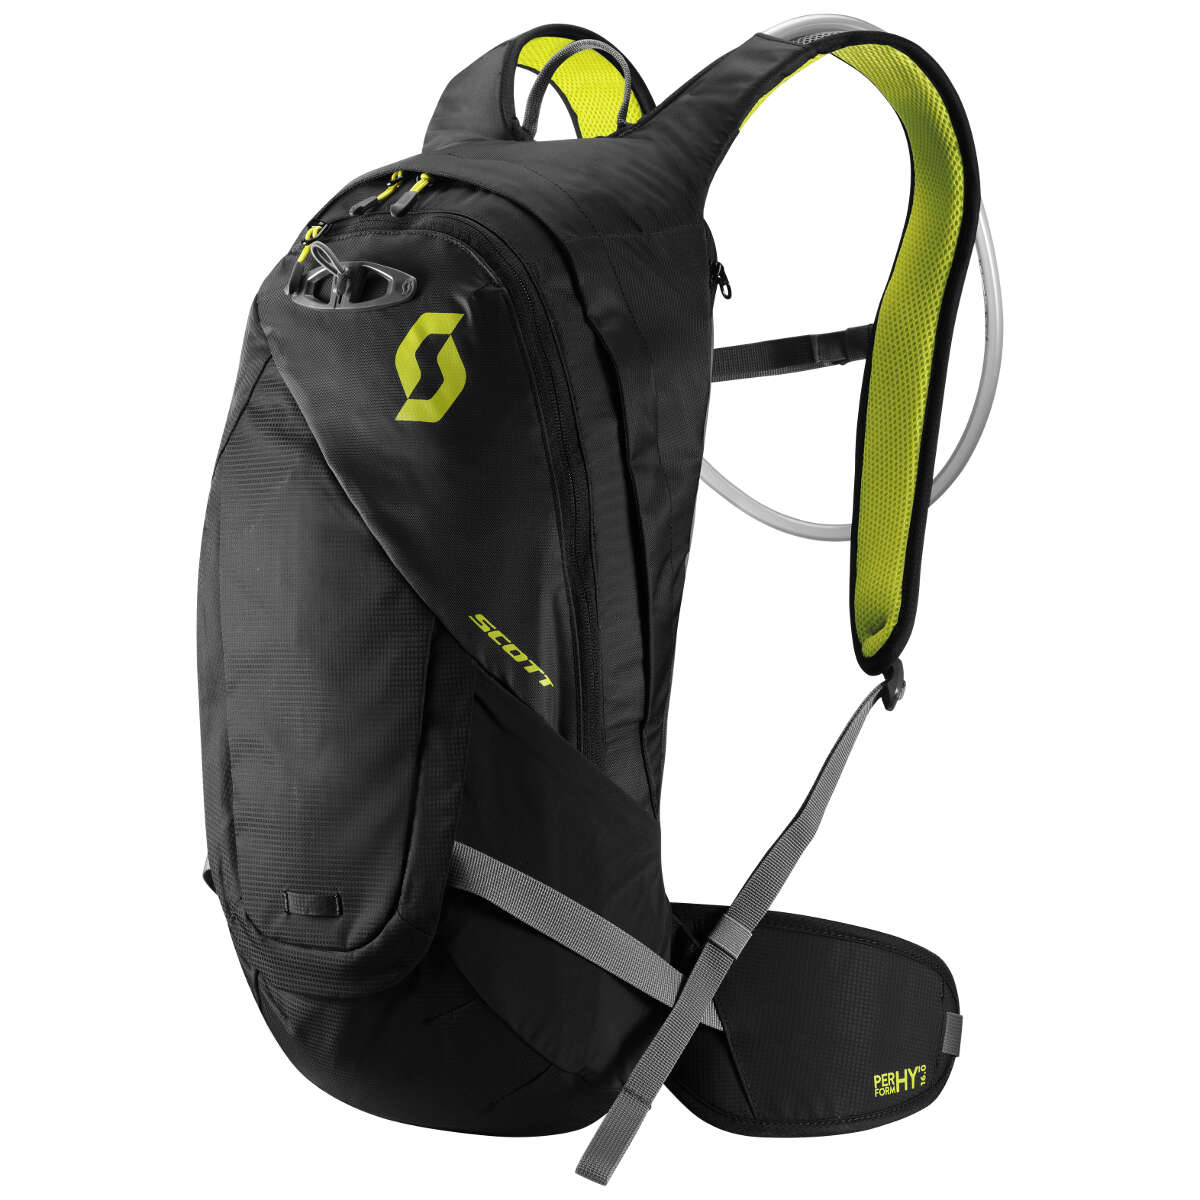 Scott Backpack with Hydration System Compartment, 16 Liter Perform HY 16 Caviar Black/Sulphur Yellow